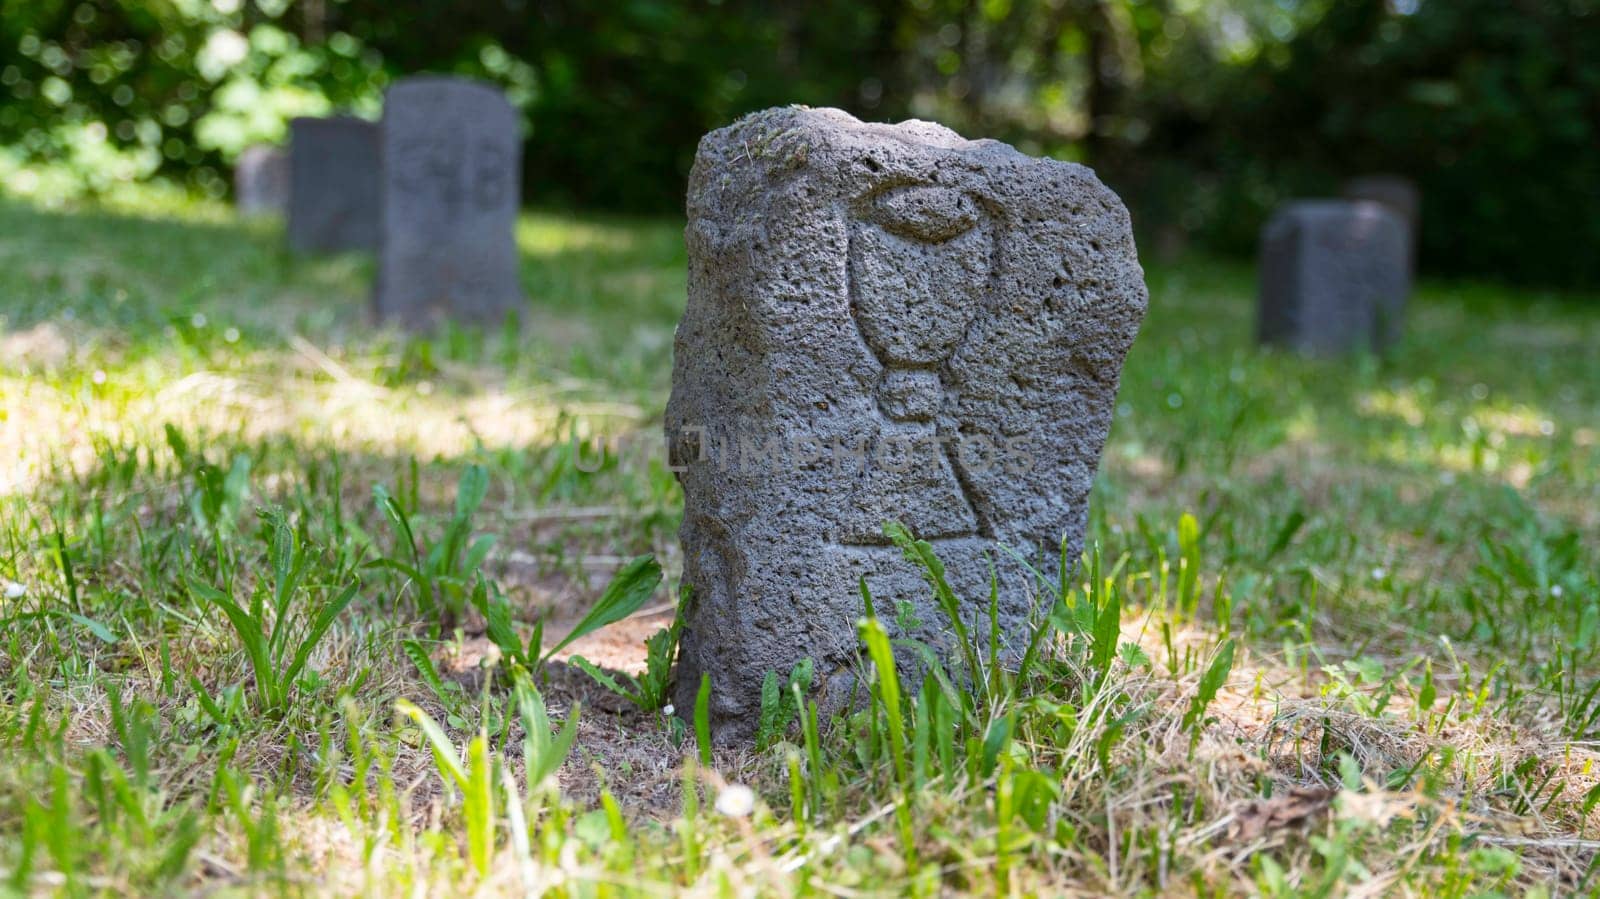 a field with boundary stones used to mark fields and pastures with numbers or symbols to recognize dog owners, usually families